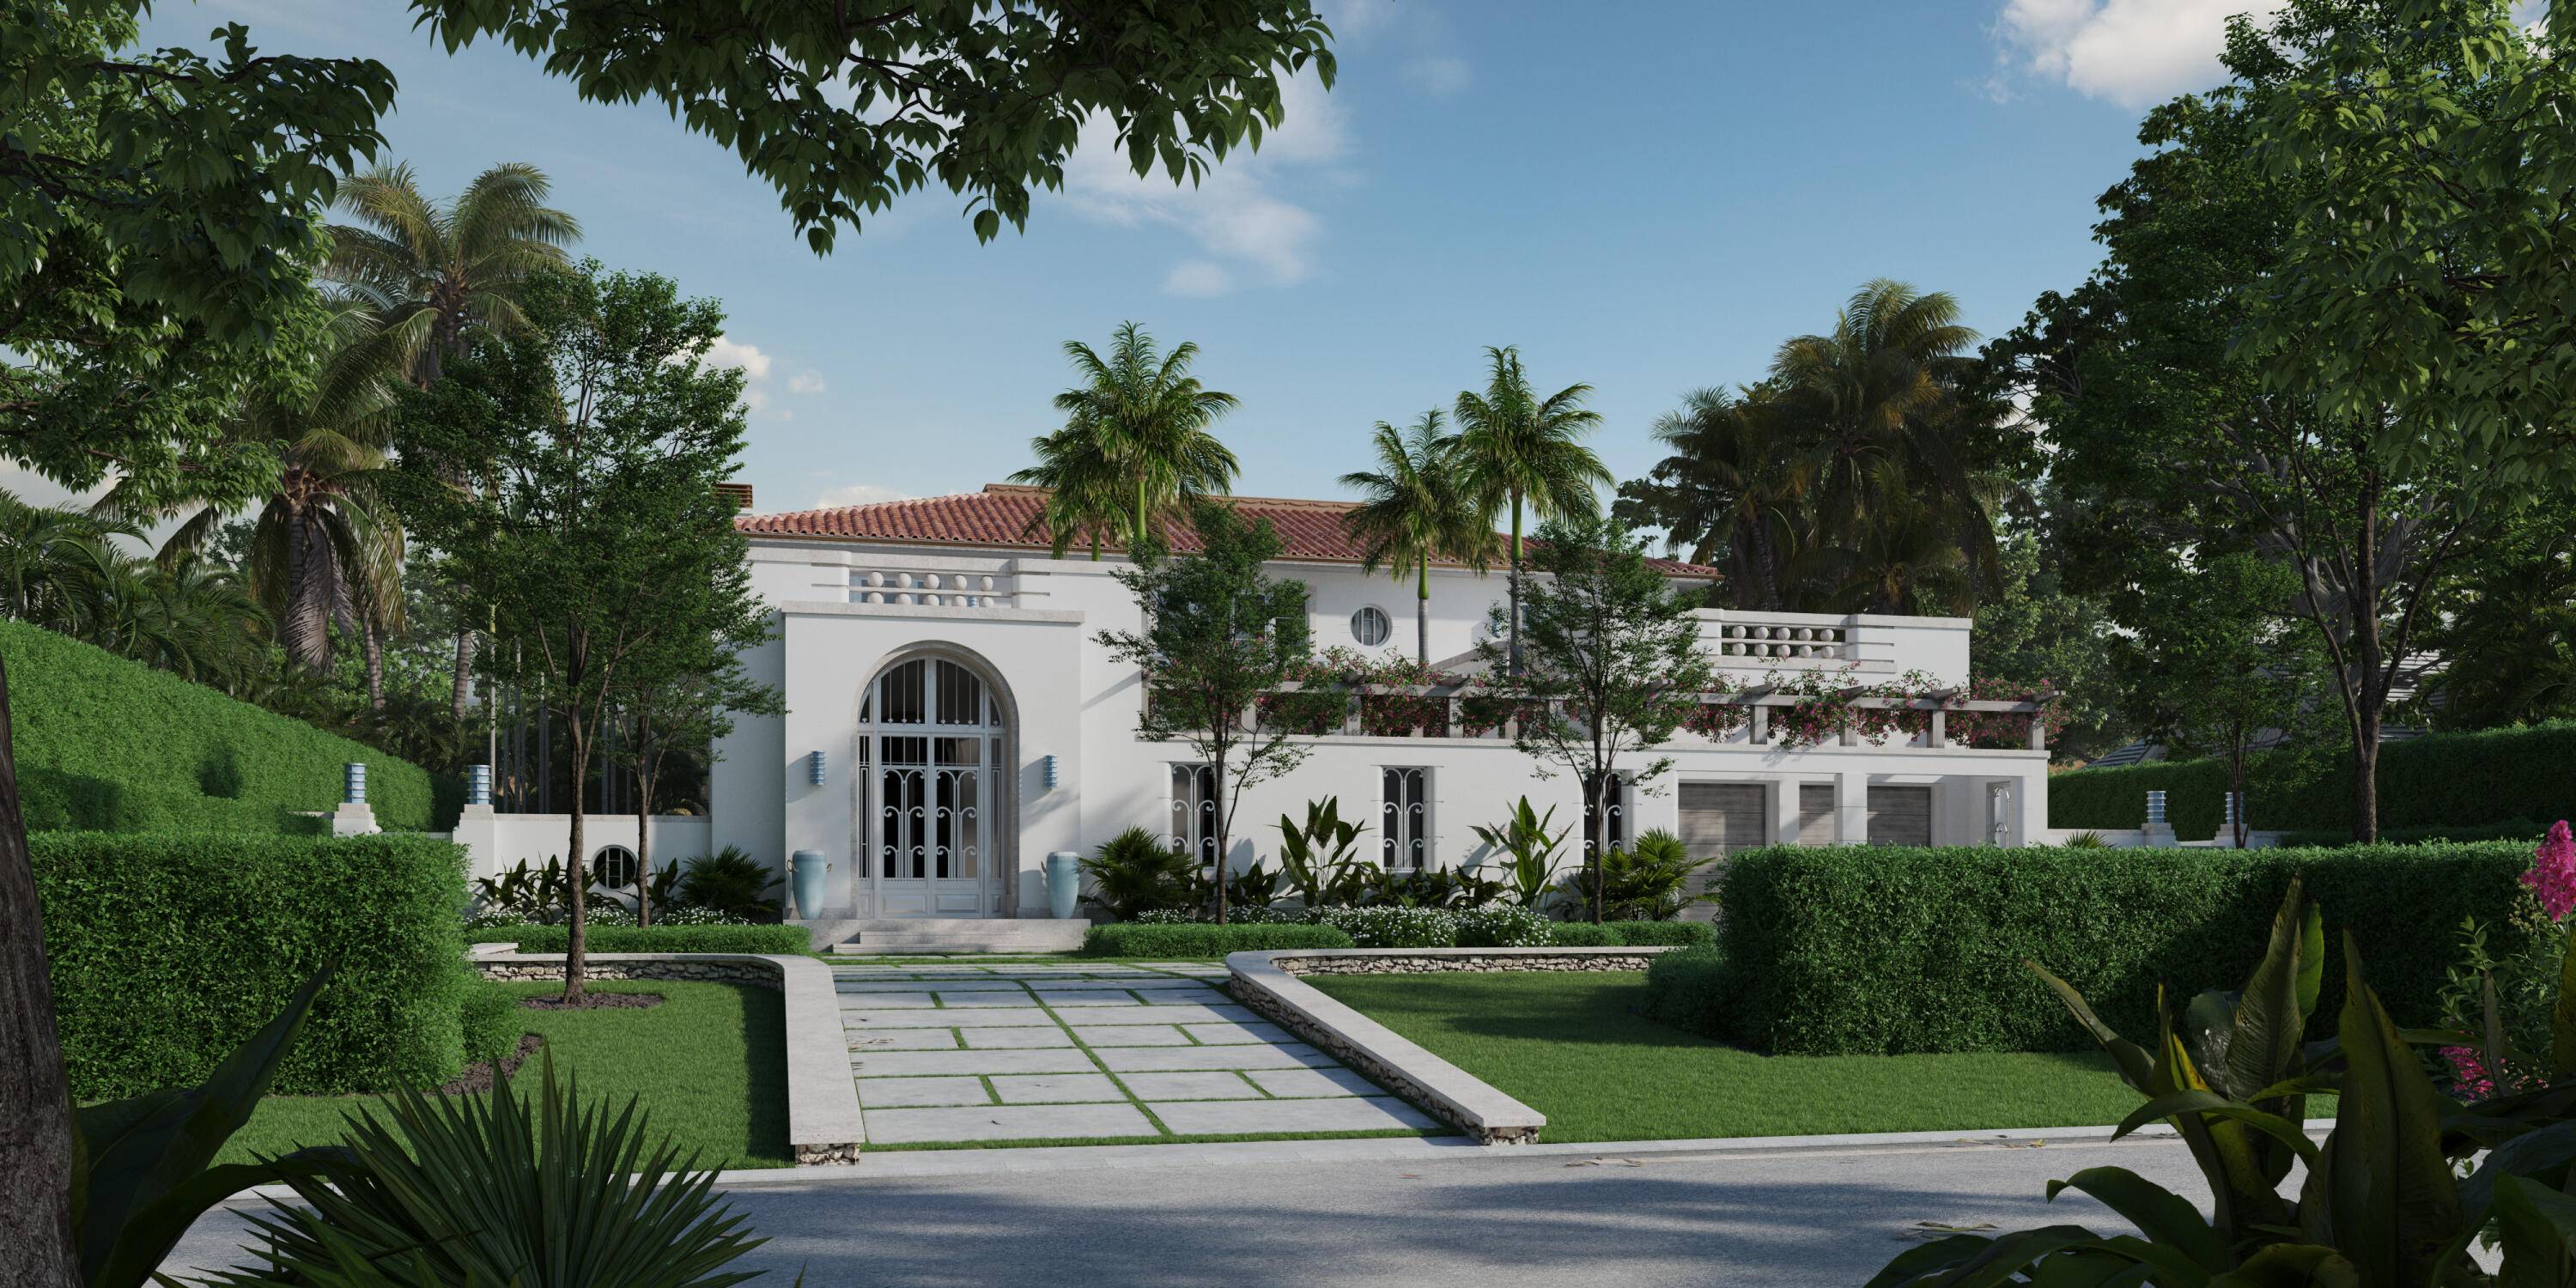 Construction has commenced on this dramatic Sabatello Homes built direct waterfront estate residence by renowned architectural firm Portundo Perotti.